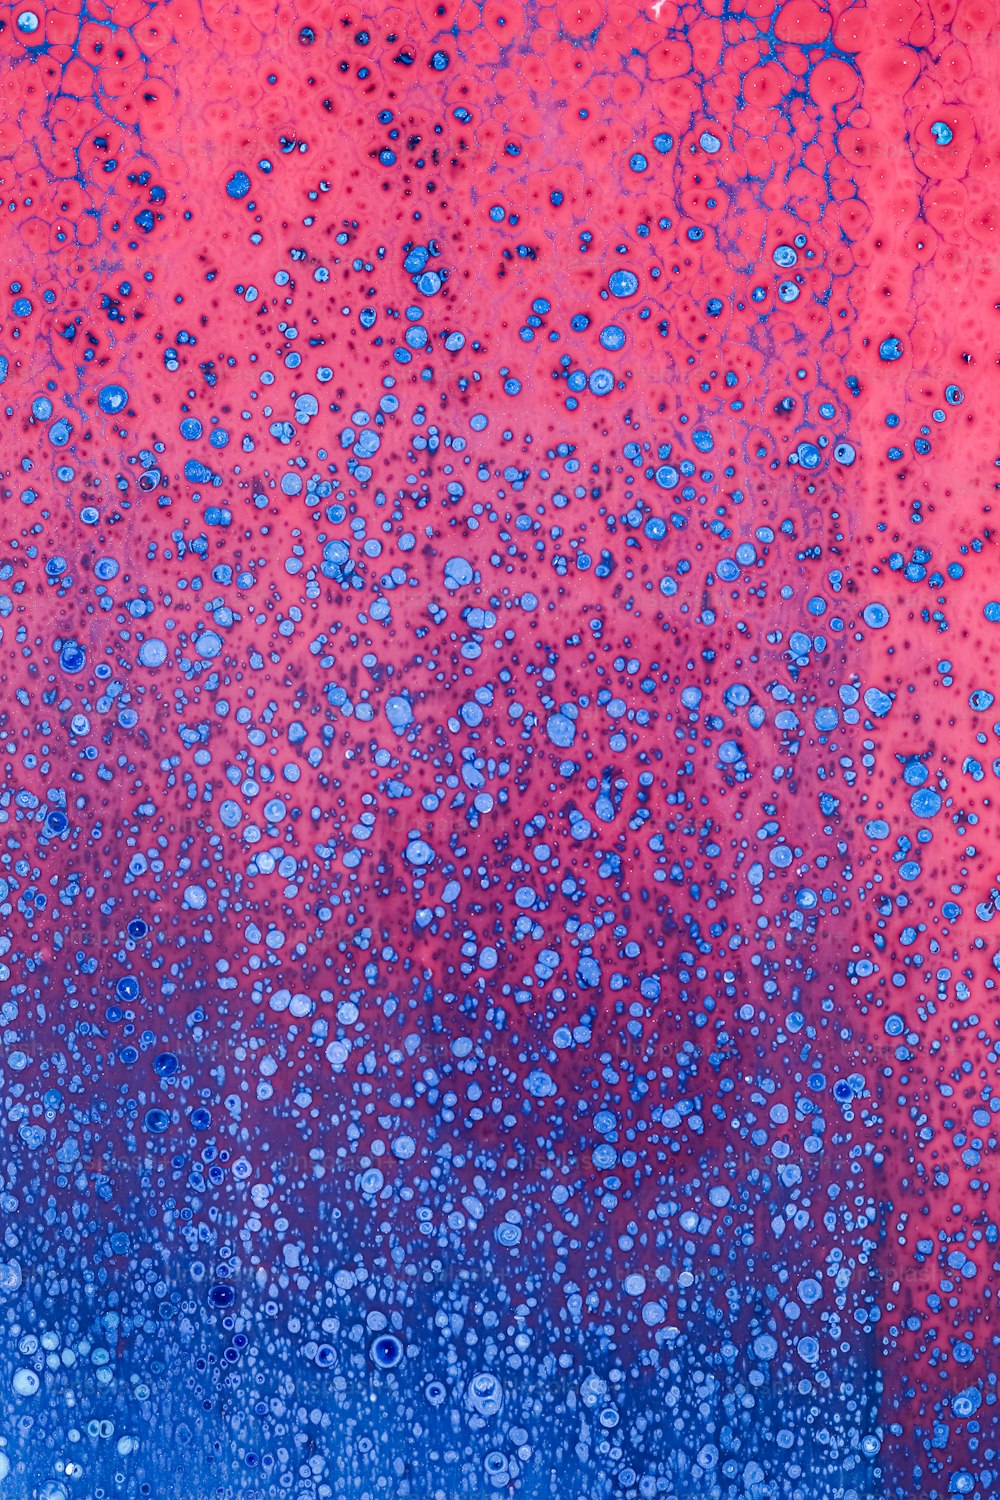 a red and blue background with drops of water